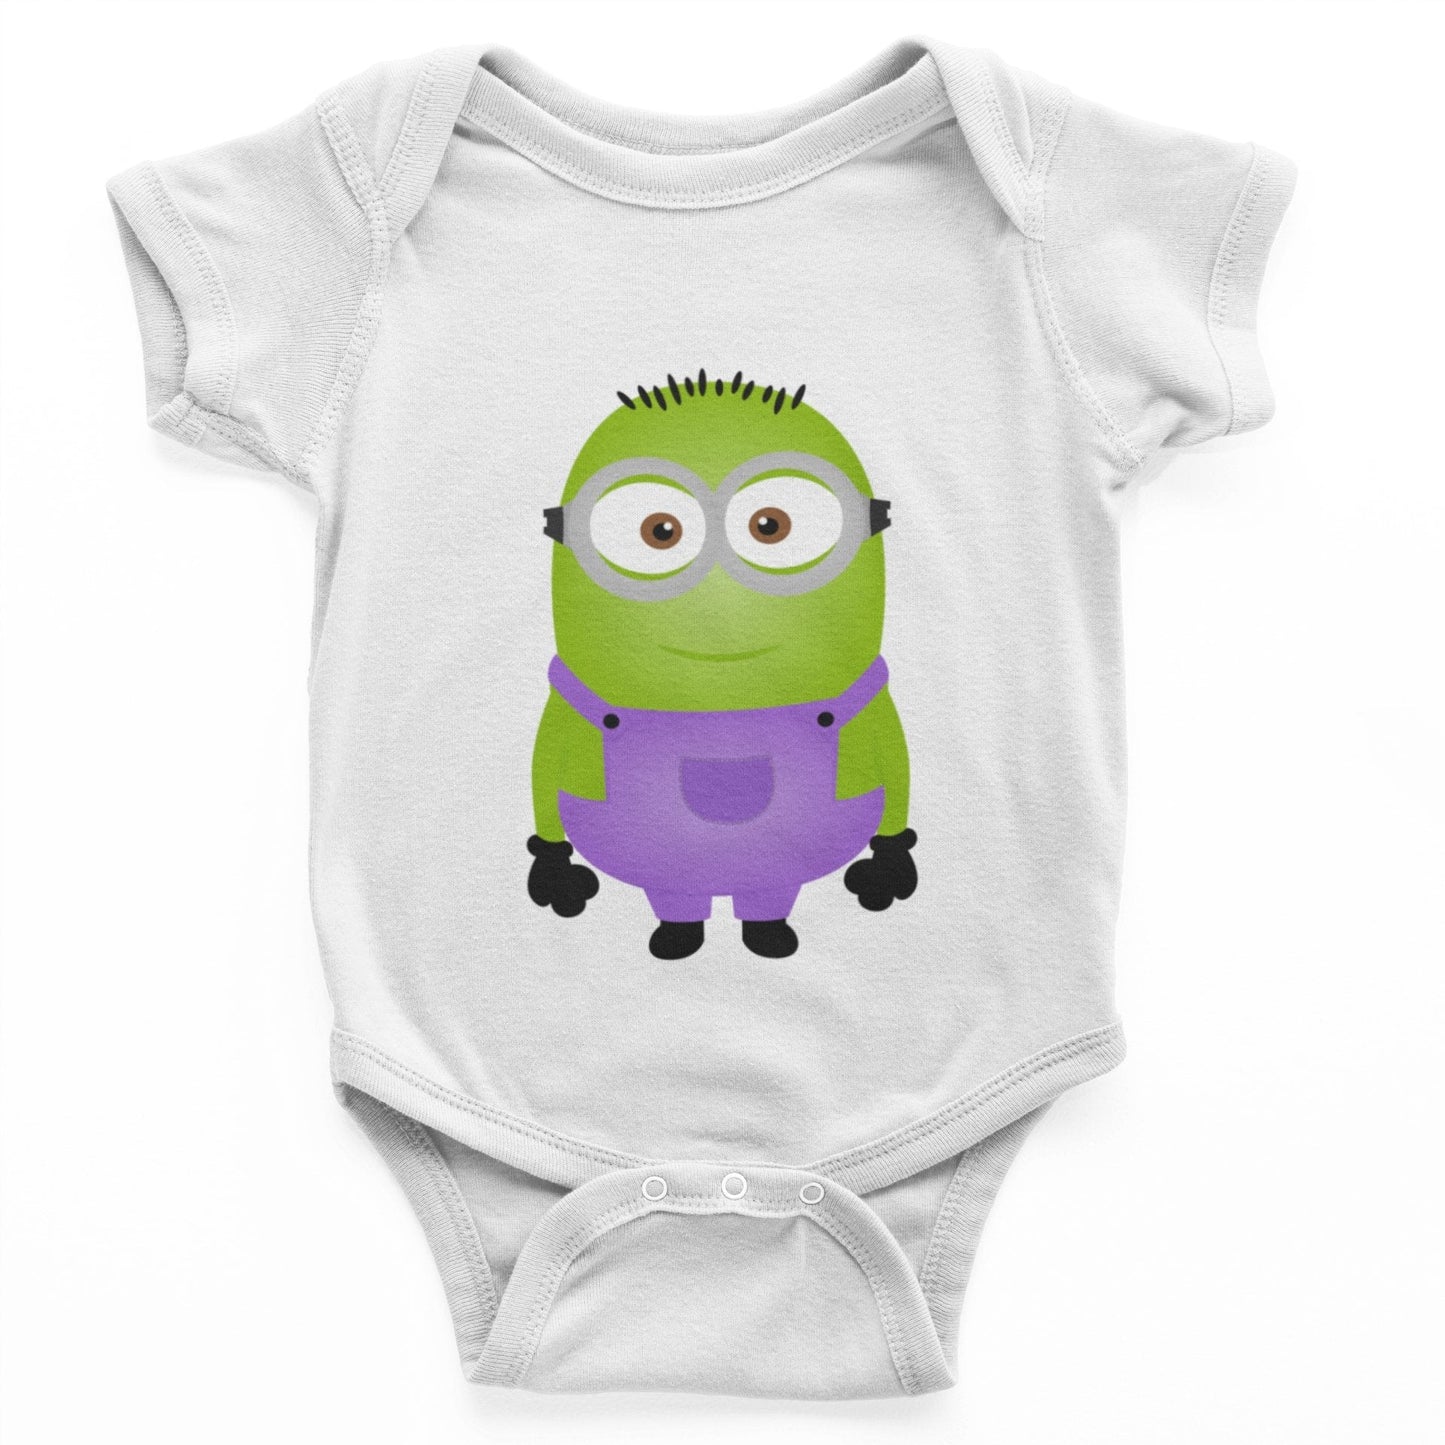 thelegalgang,Minion Hulk Graphic Onesies for Babies,.